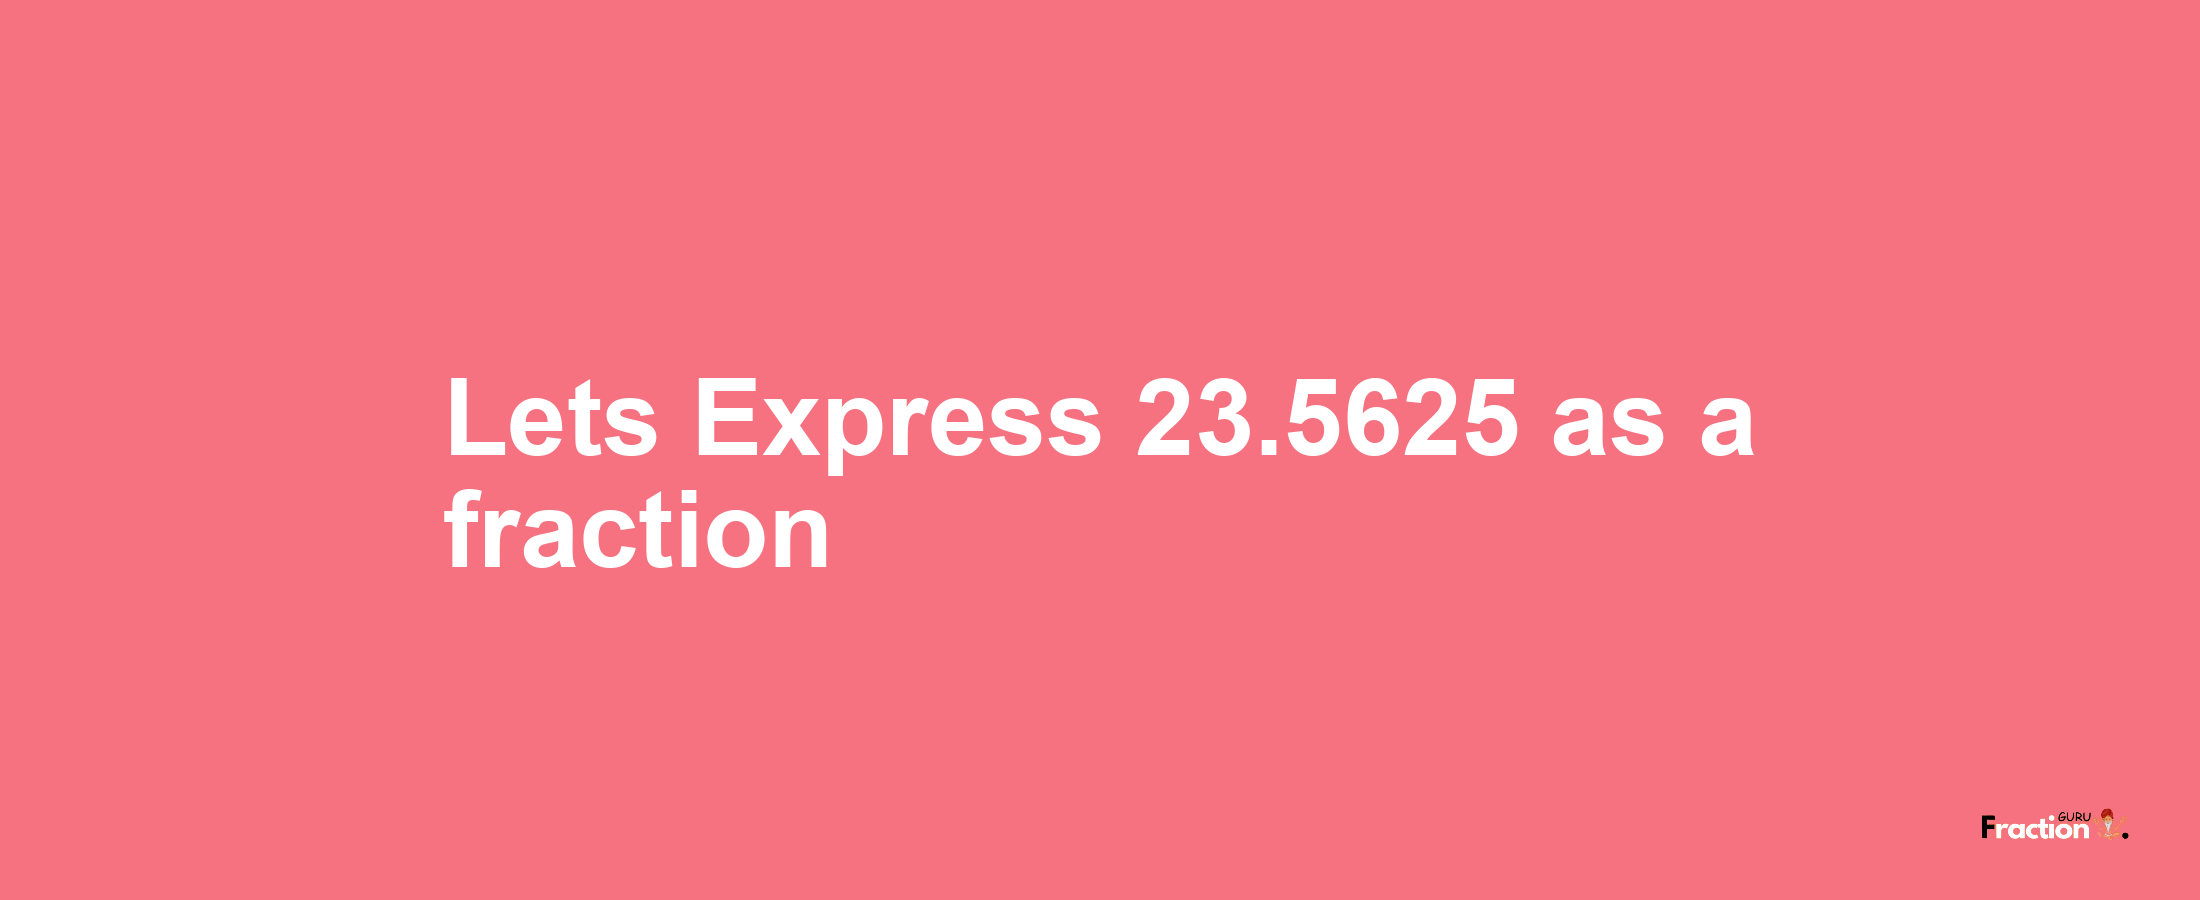 Lets Express 23.5625 as afraction